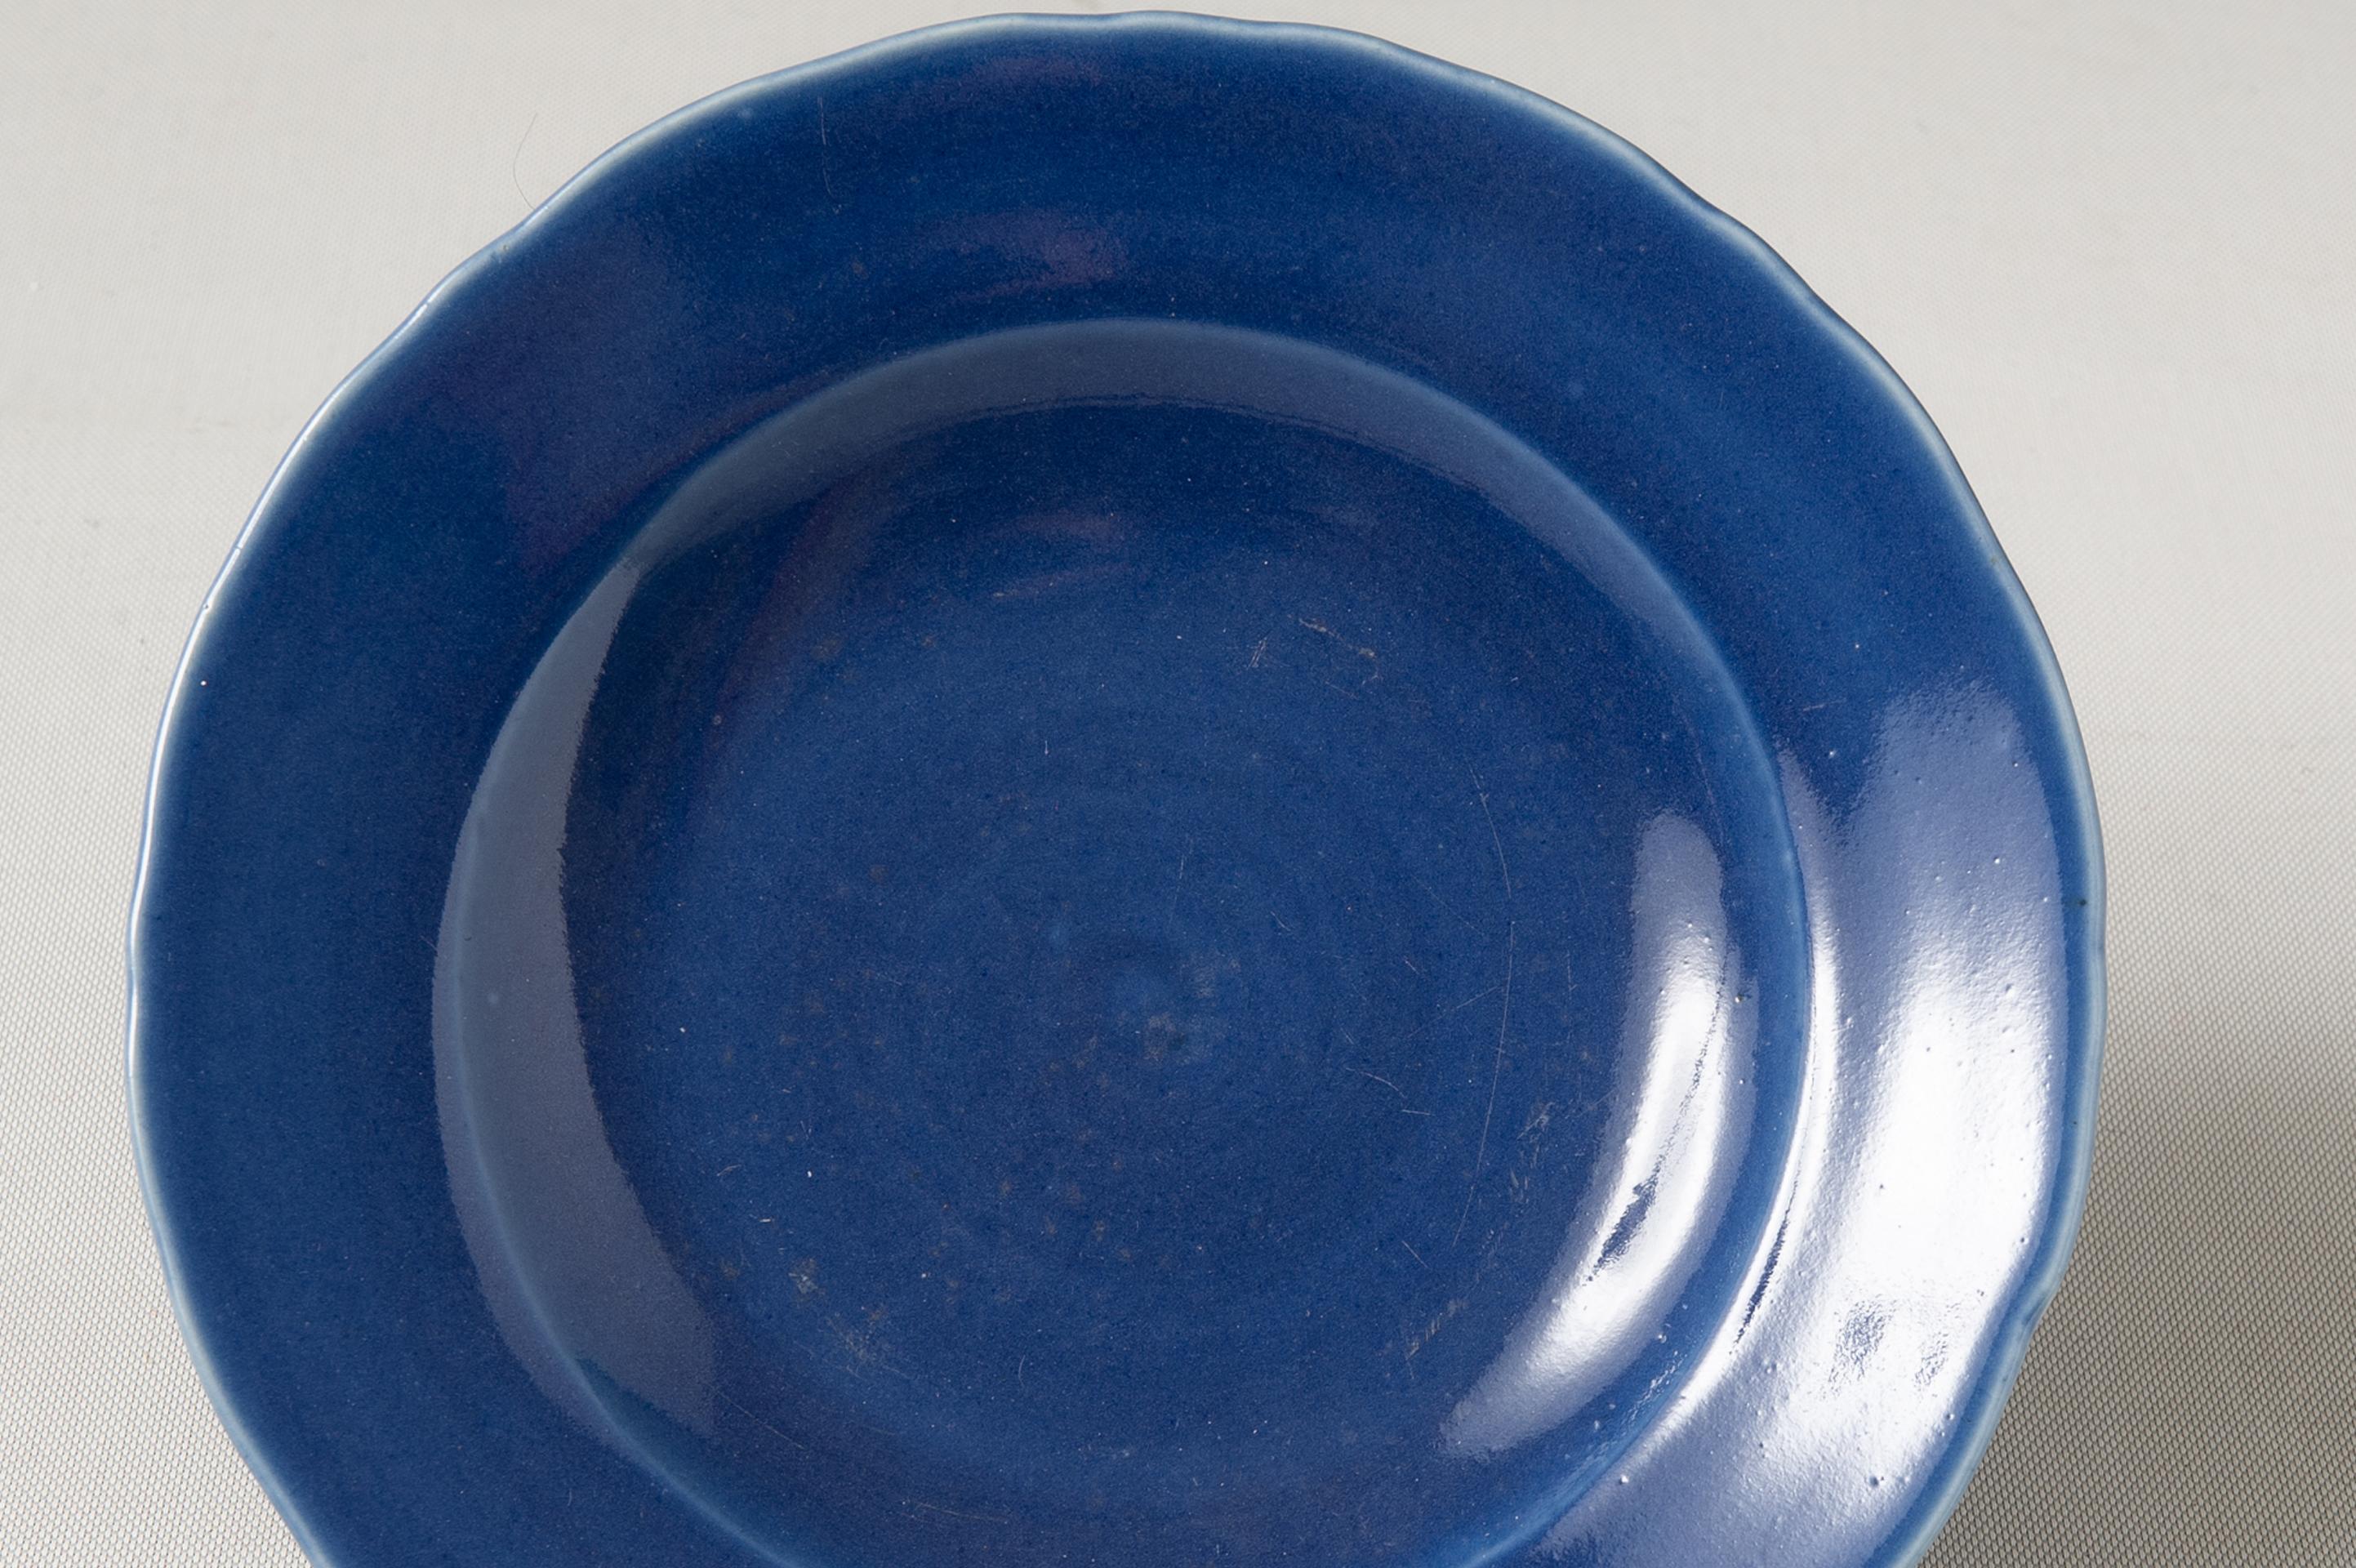 Pure, simple, elegant, antique from '800 Ching dinasty: a bleu porcelain dish to put everywhere, to admire and to use
when you wish to offer something to your guests.
Look all collection under my name Enrica Pasino.
O/2286.